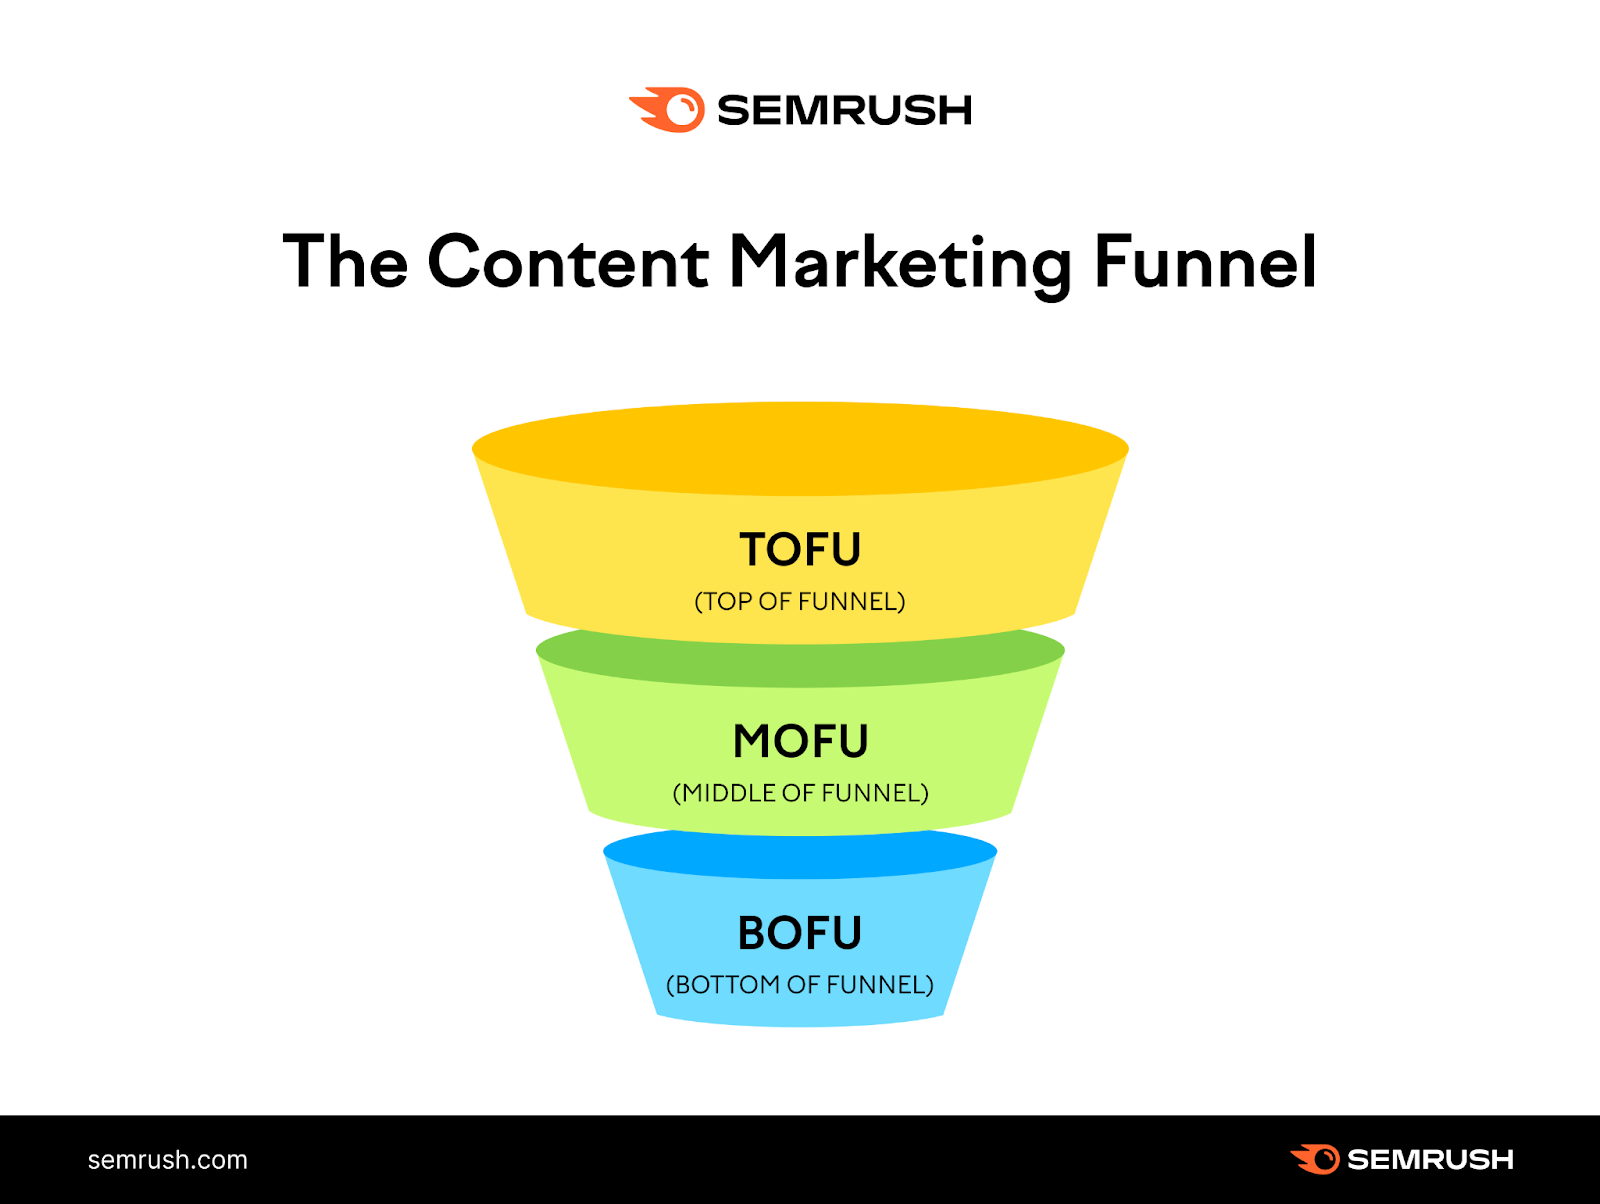 The content marketing funnel infographic